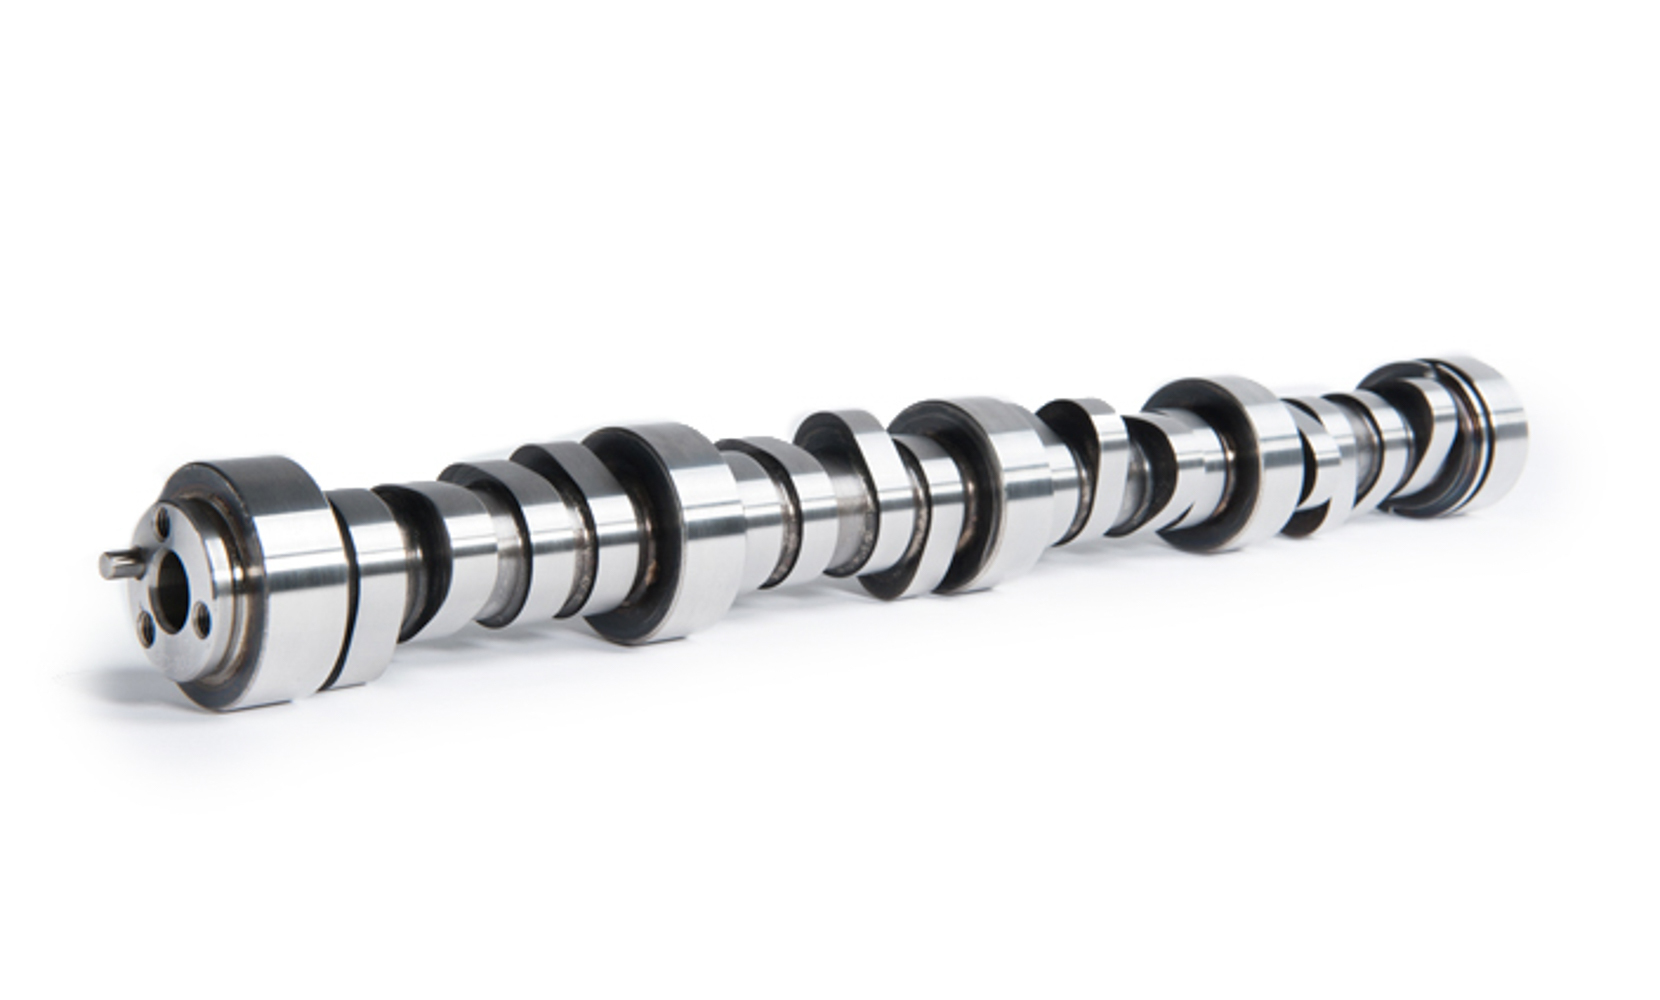 Cam Motion 03-01-0050 Supercharger LS-Series Hydraulic Roller Camshaft 621 / 604 Lift